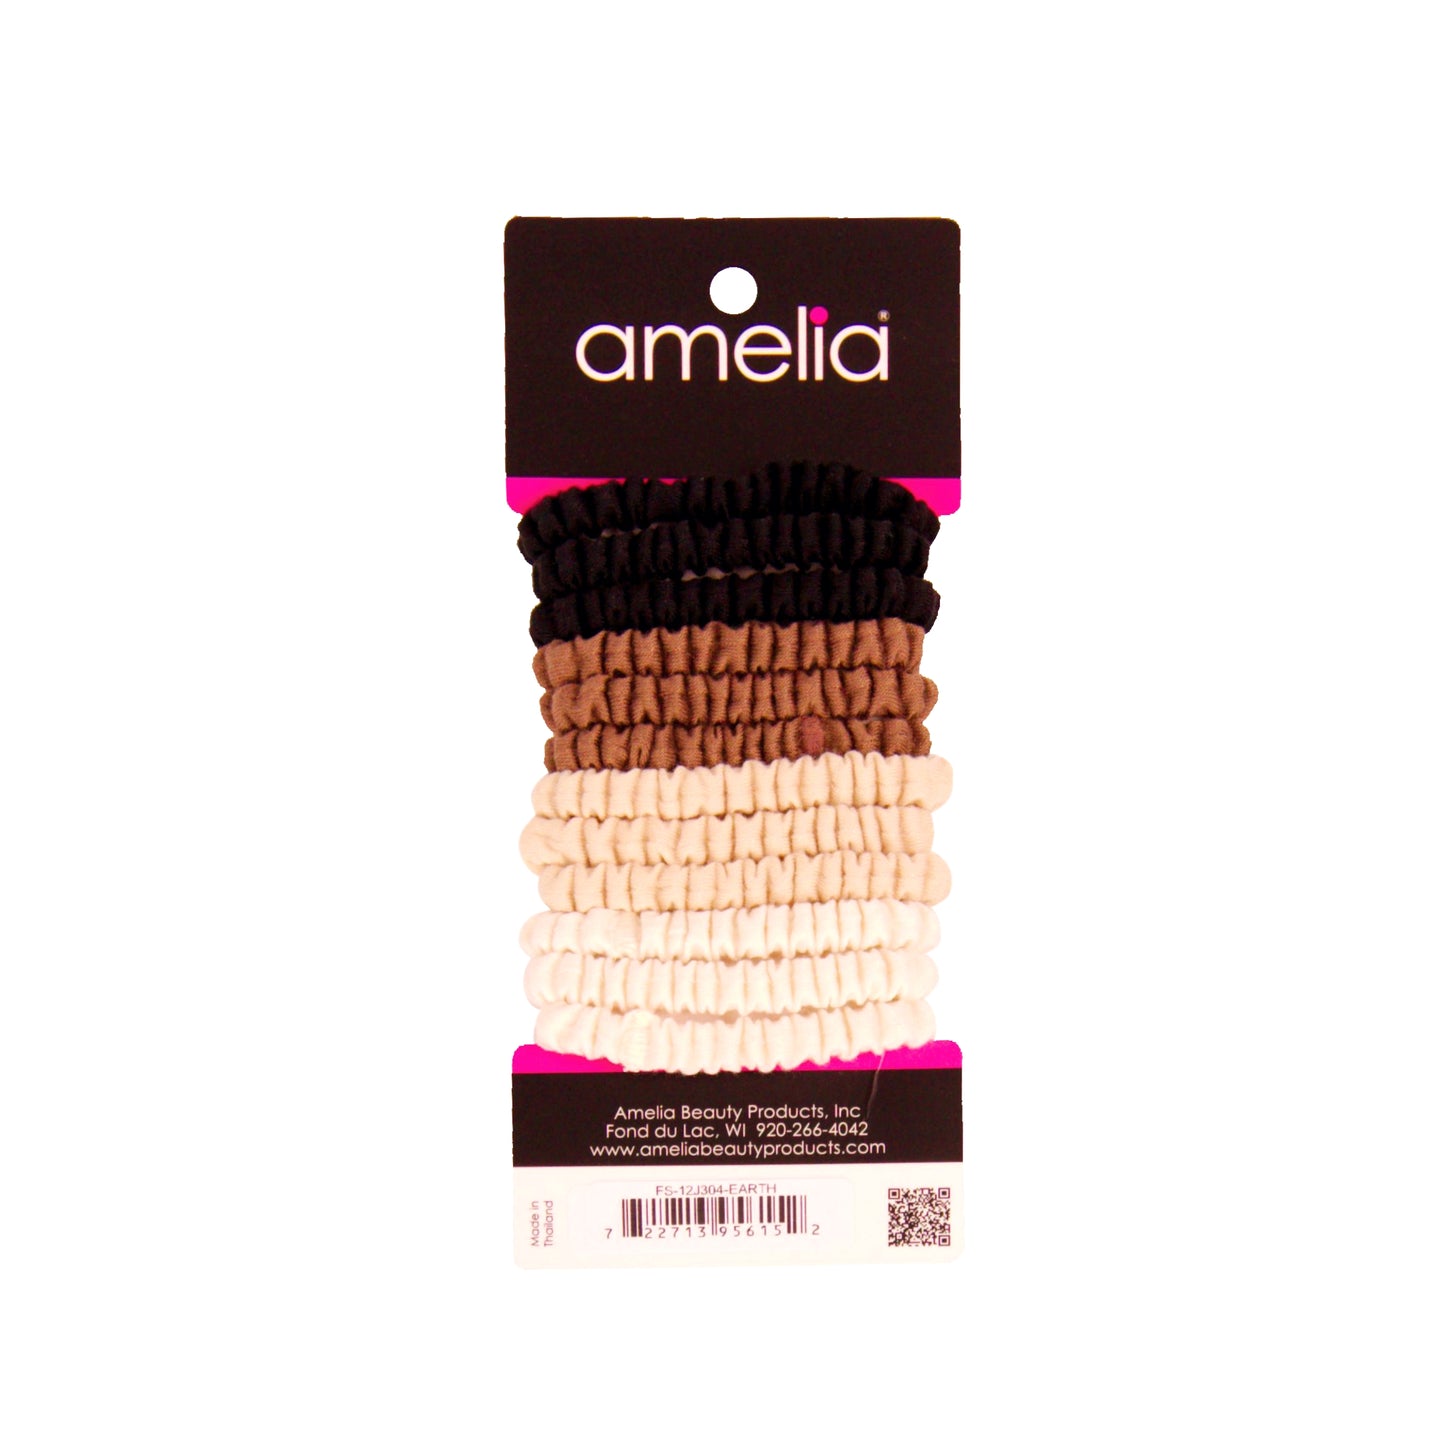 Amelia Beauty, Earth Tones Skinny Jersey Scrunchies, 2.125in Diameter, Gentle on Hair, Strong Hold, No Snag, No Dents or Creases. 12 Pack